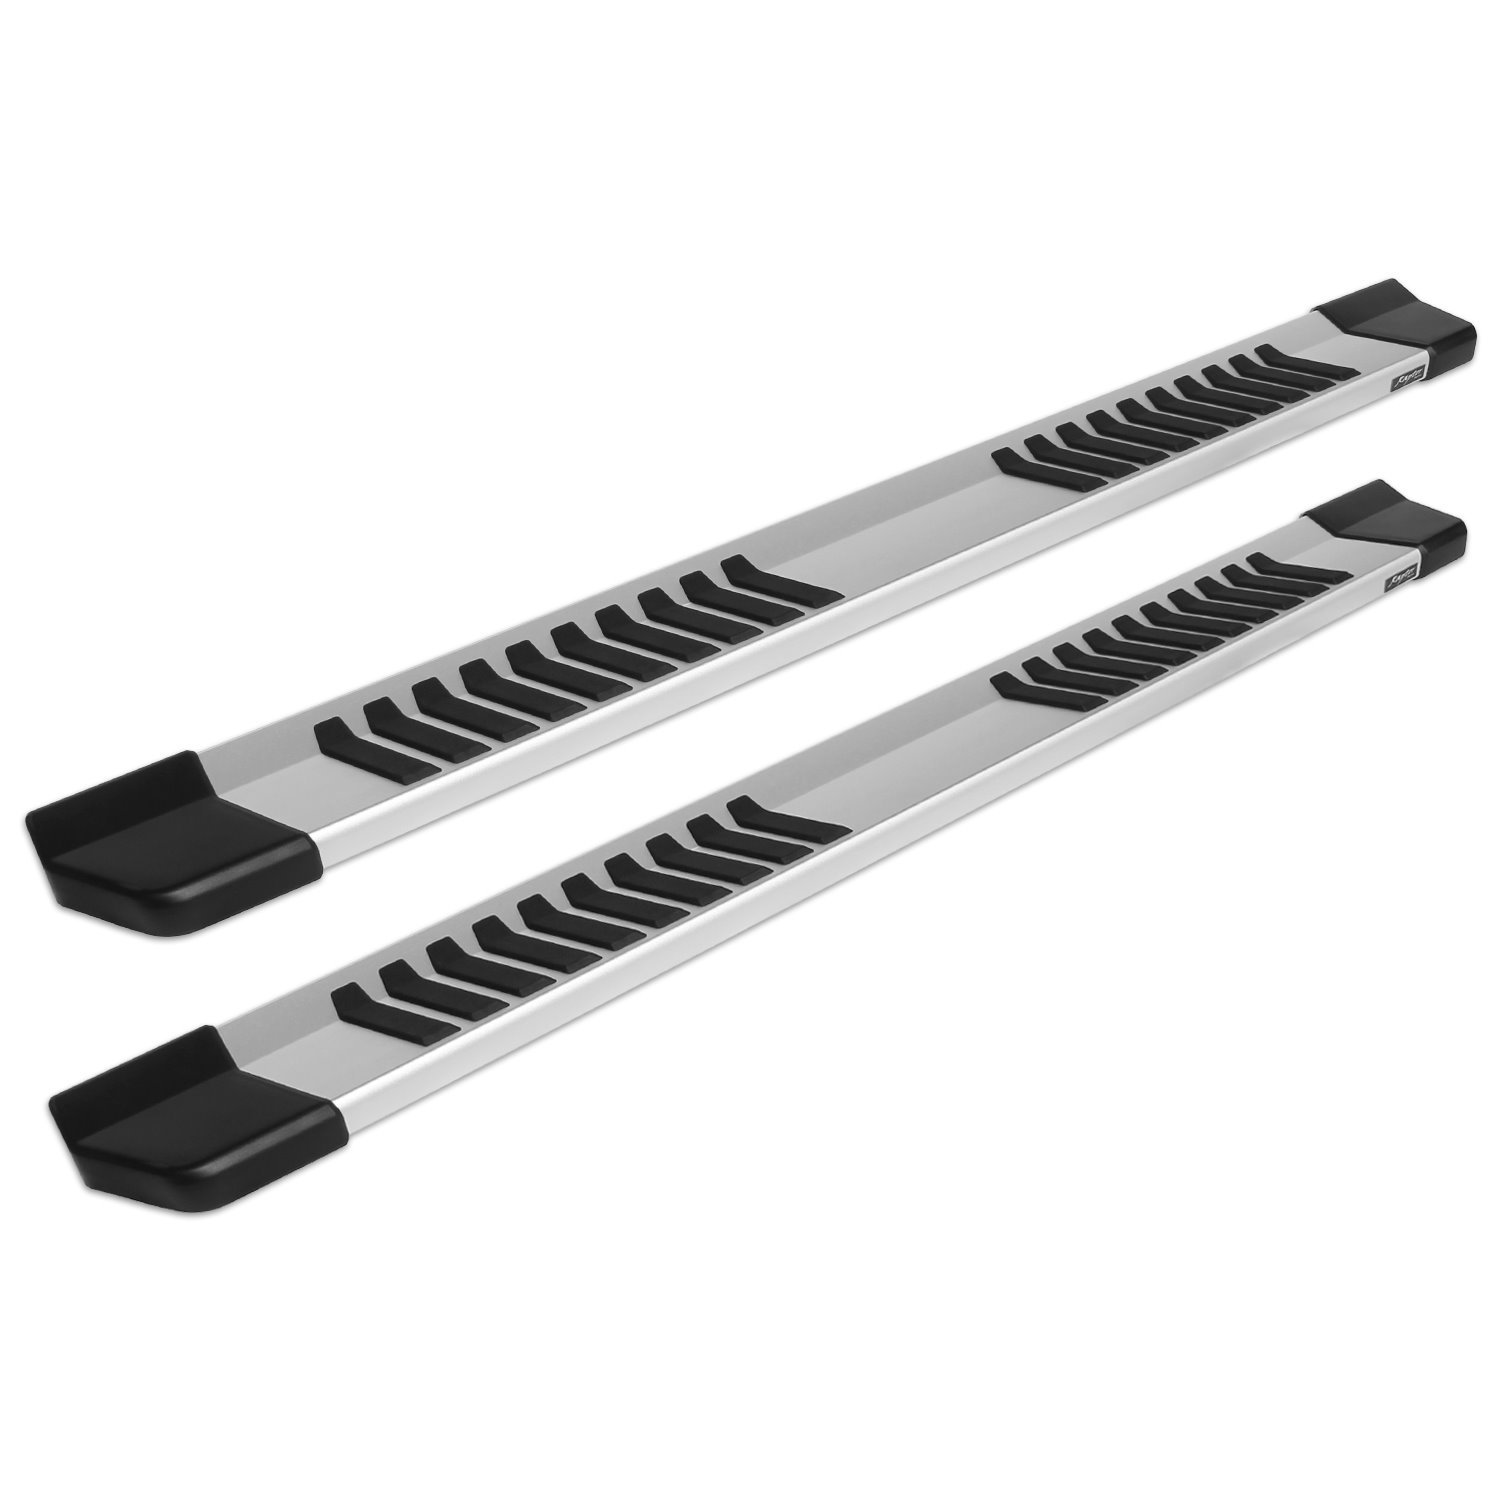 1704-0142 Raptor Series 6 in OEM Style Slide Track Running Boards, Brushed Aluminum, Fits Select Toyota Tundra CrewMax Cab